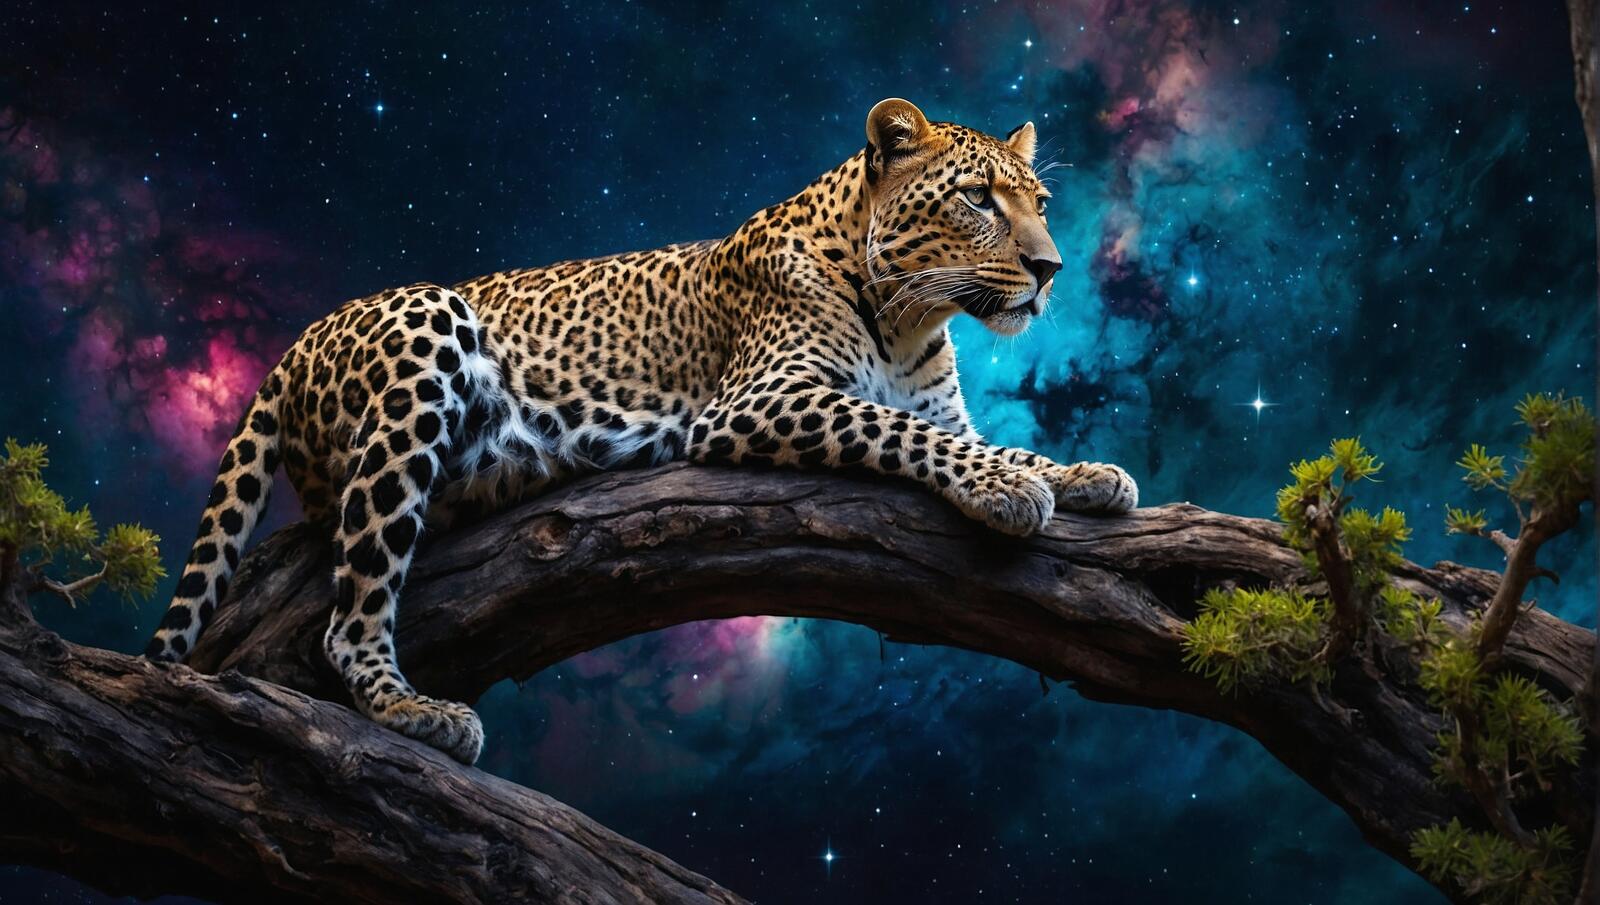 Free photo A painting of a leopard on a tree branch under the stars